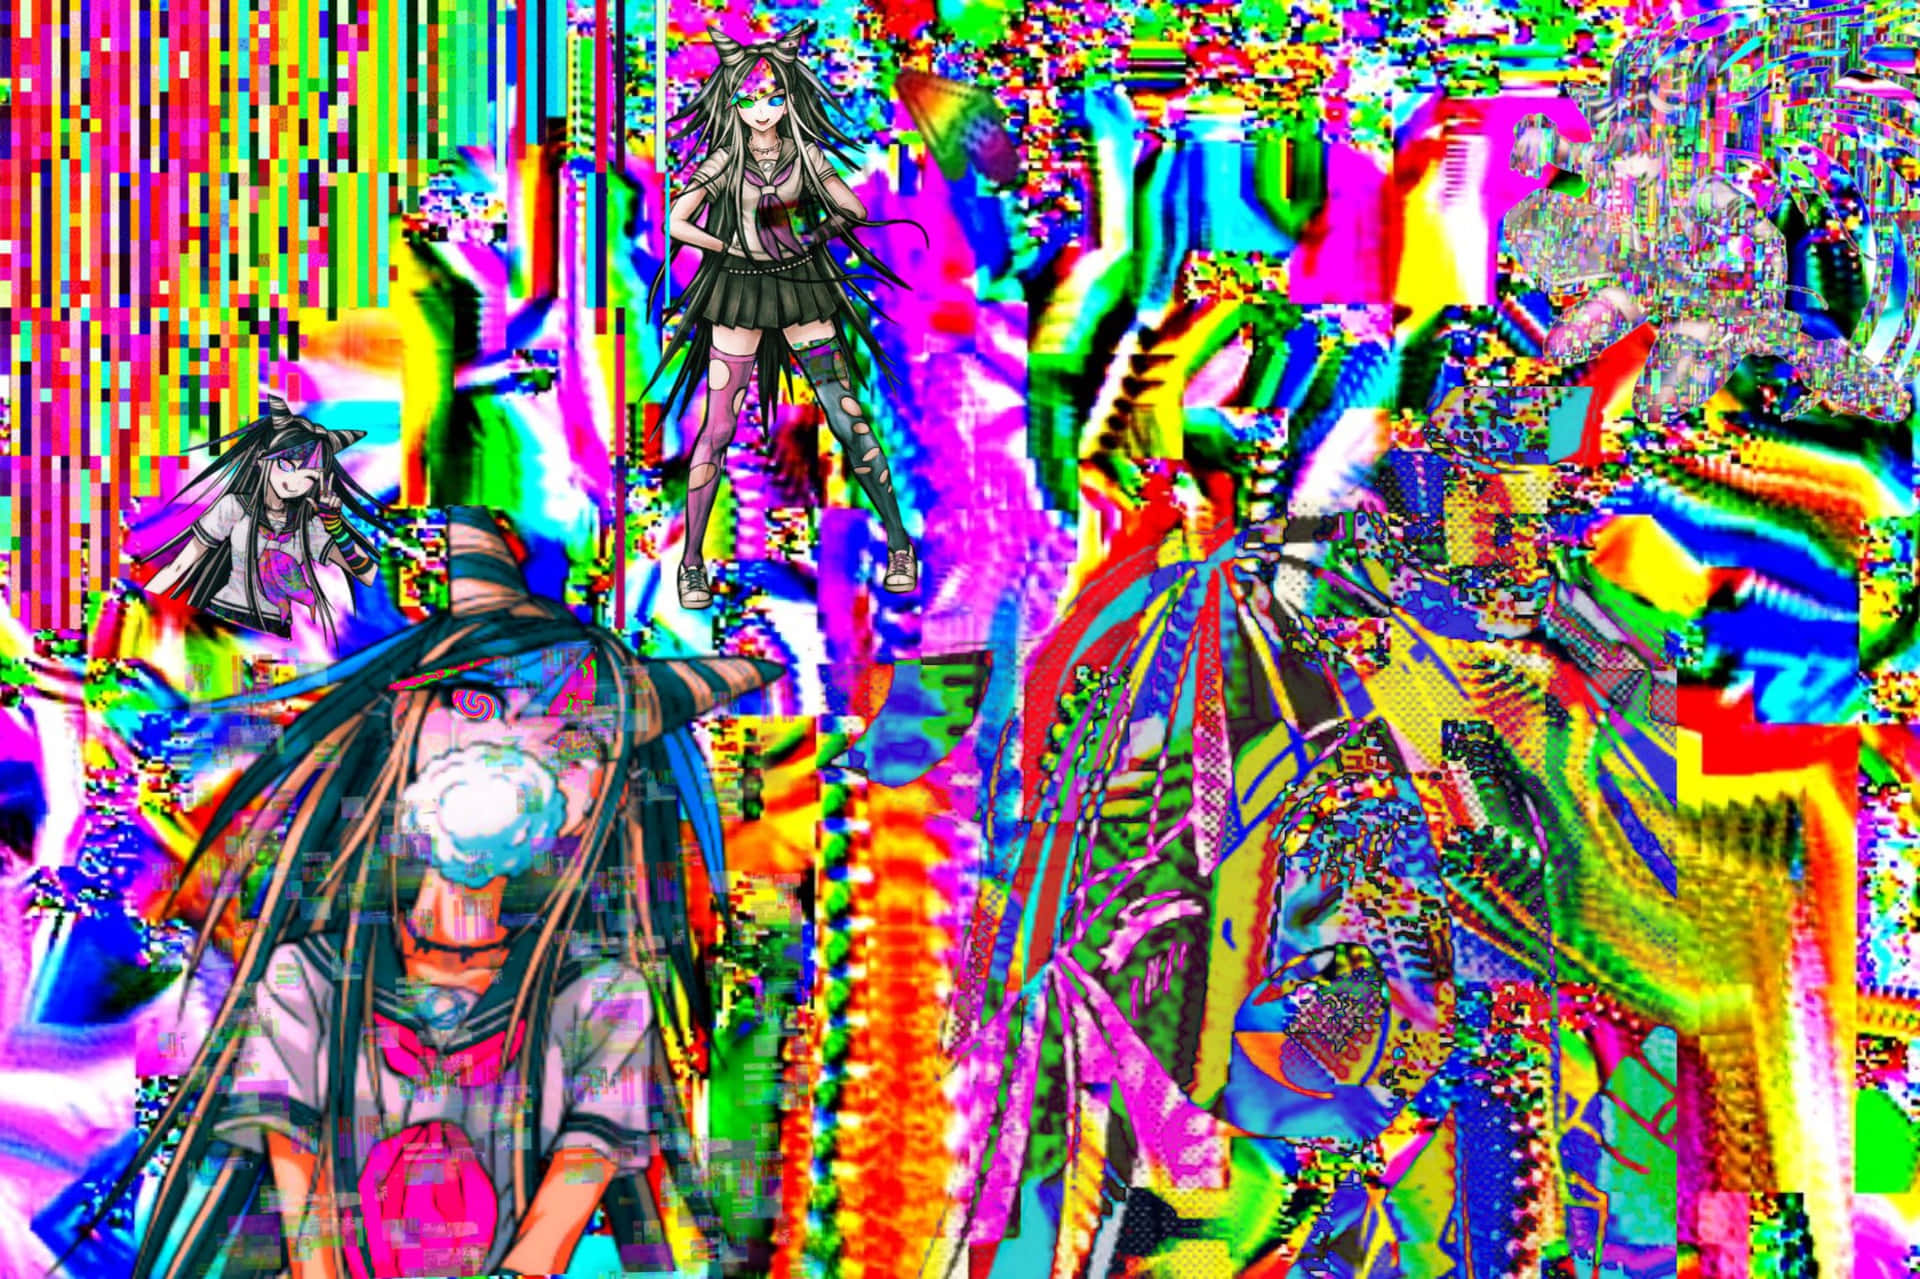 Subverting reality with the digital art movement Glitchcore